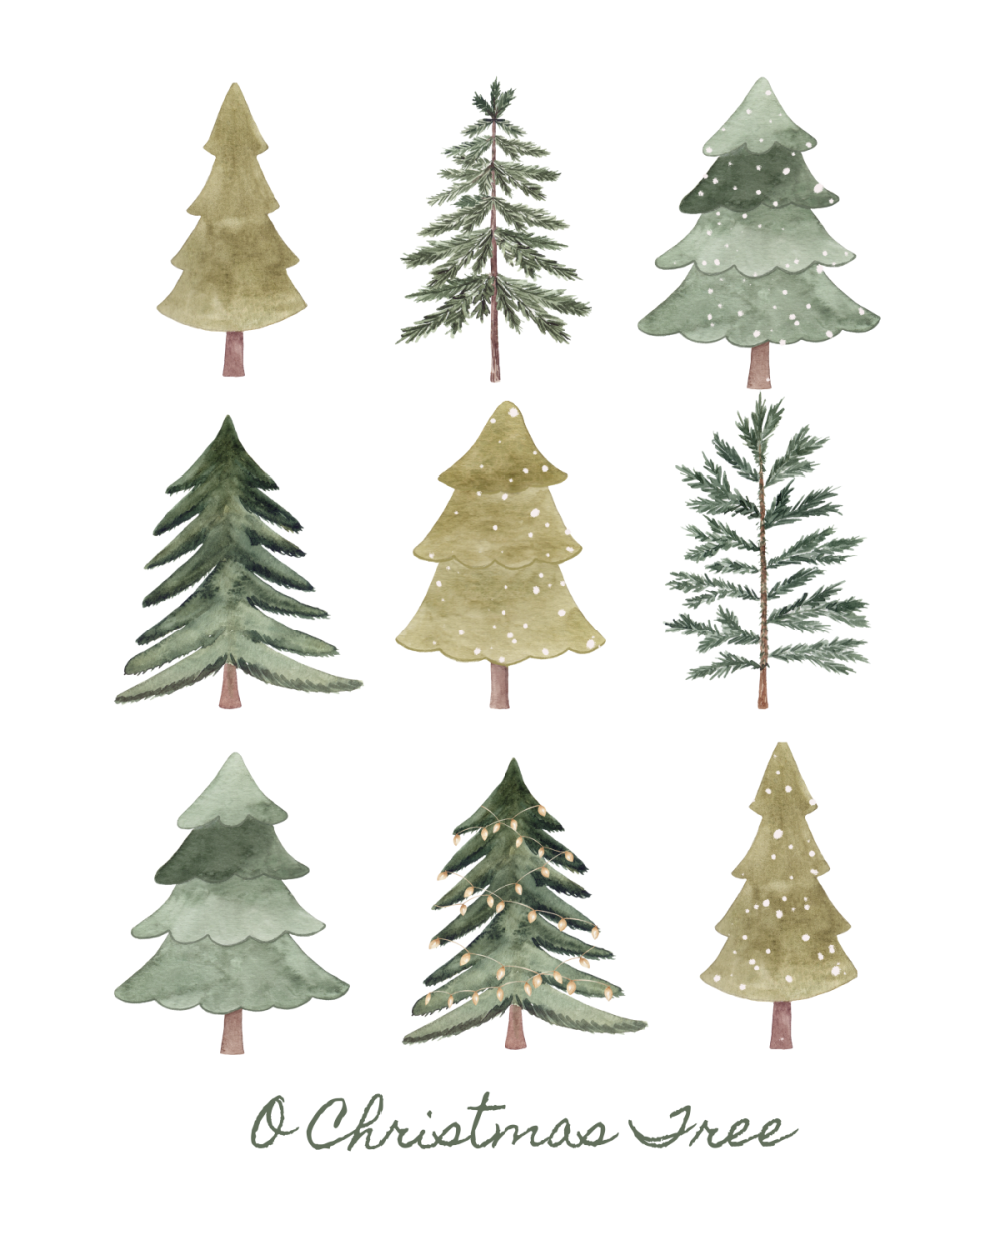 Grid of different Christmas trees with saying "O Christmas Tree" at bottom.